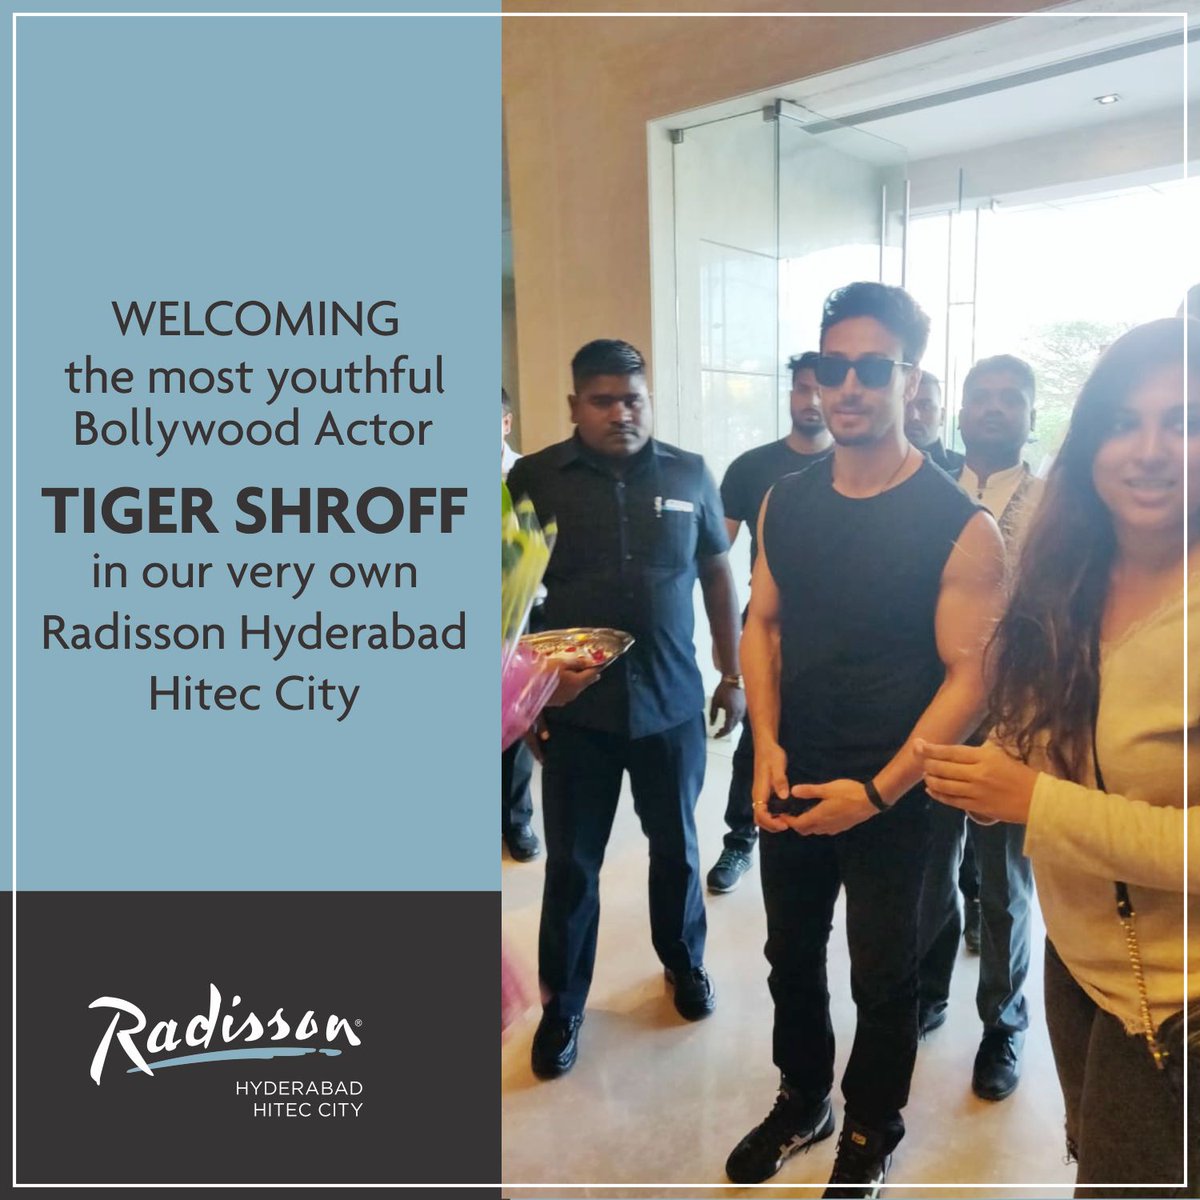 We feel privileged to welcome Tiger Shroff, the youth icon of Bollywood at Radisson Hyderabad Hitec City.

Best wishes for your Delightful stay! :)

#CelebrityGuest #TigerShroff #Bollywood #RadissonHyderabadHitecCity #Hyderabad